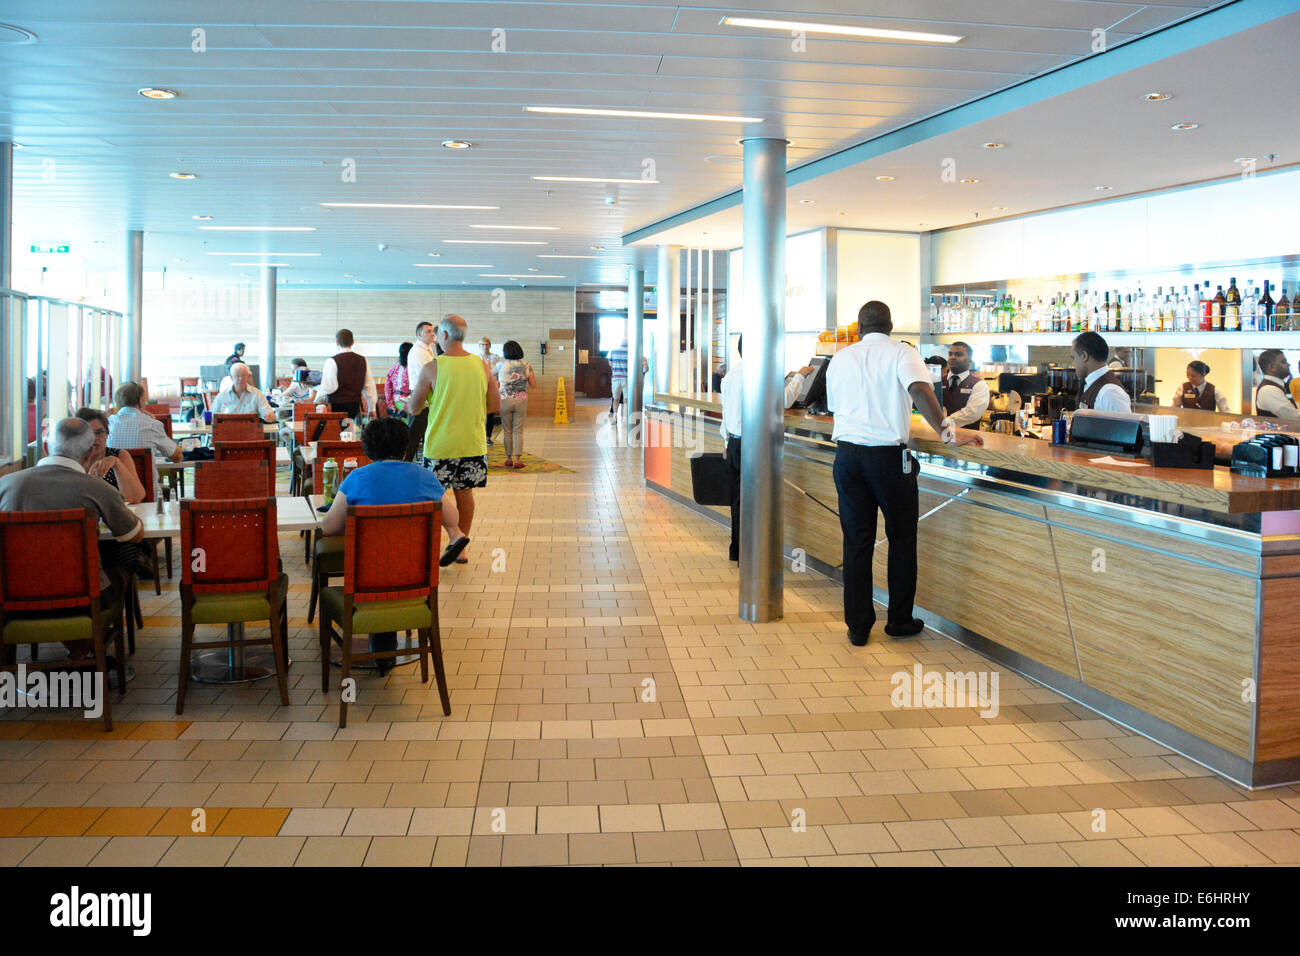 Passengers & staff interior of cruise ship cafeteria deck with breakfast buffet tables with bar counter open aboard a large Mediterranean cruise liner Stock Photo